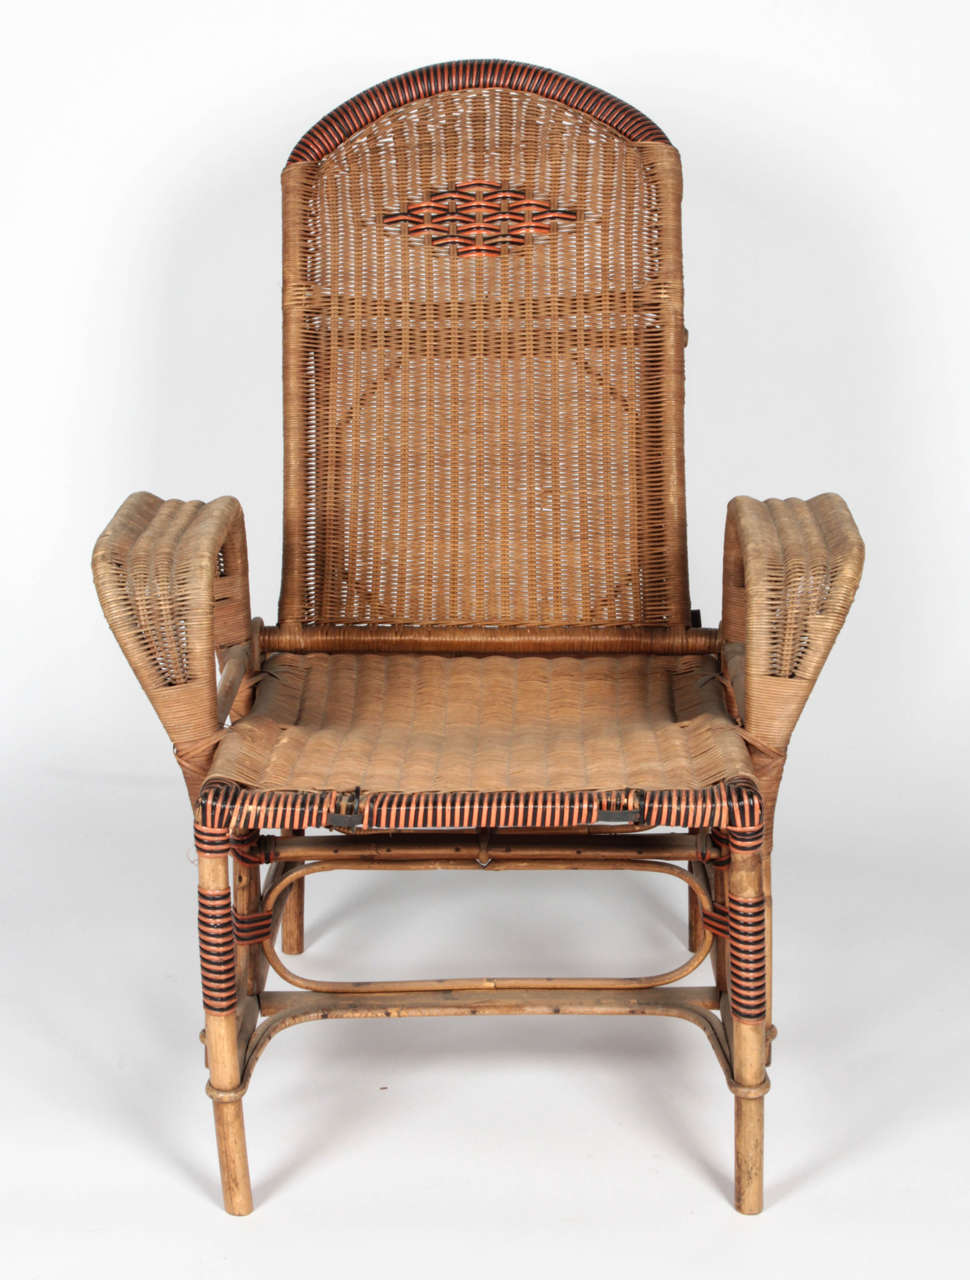 Art Deco Reclining Wicker Lounge Chair with Detachable Foot Rest 3